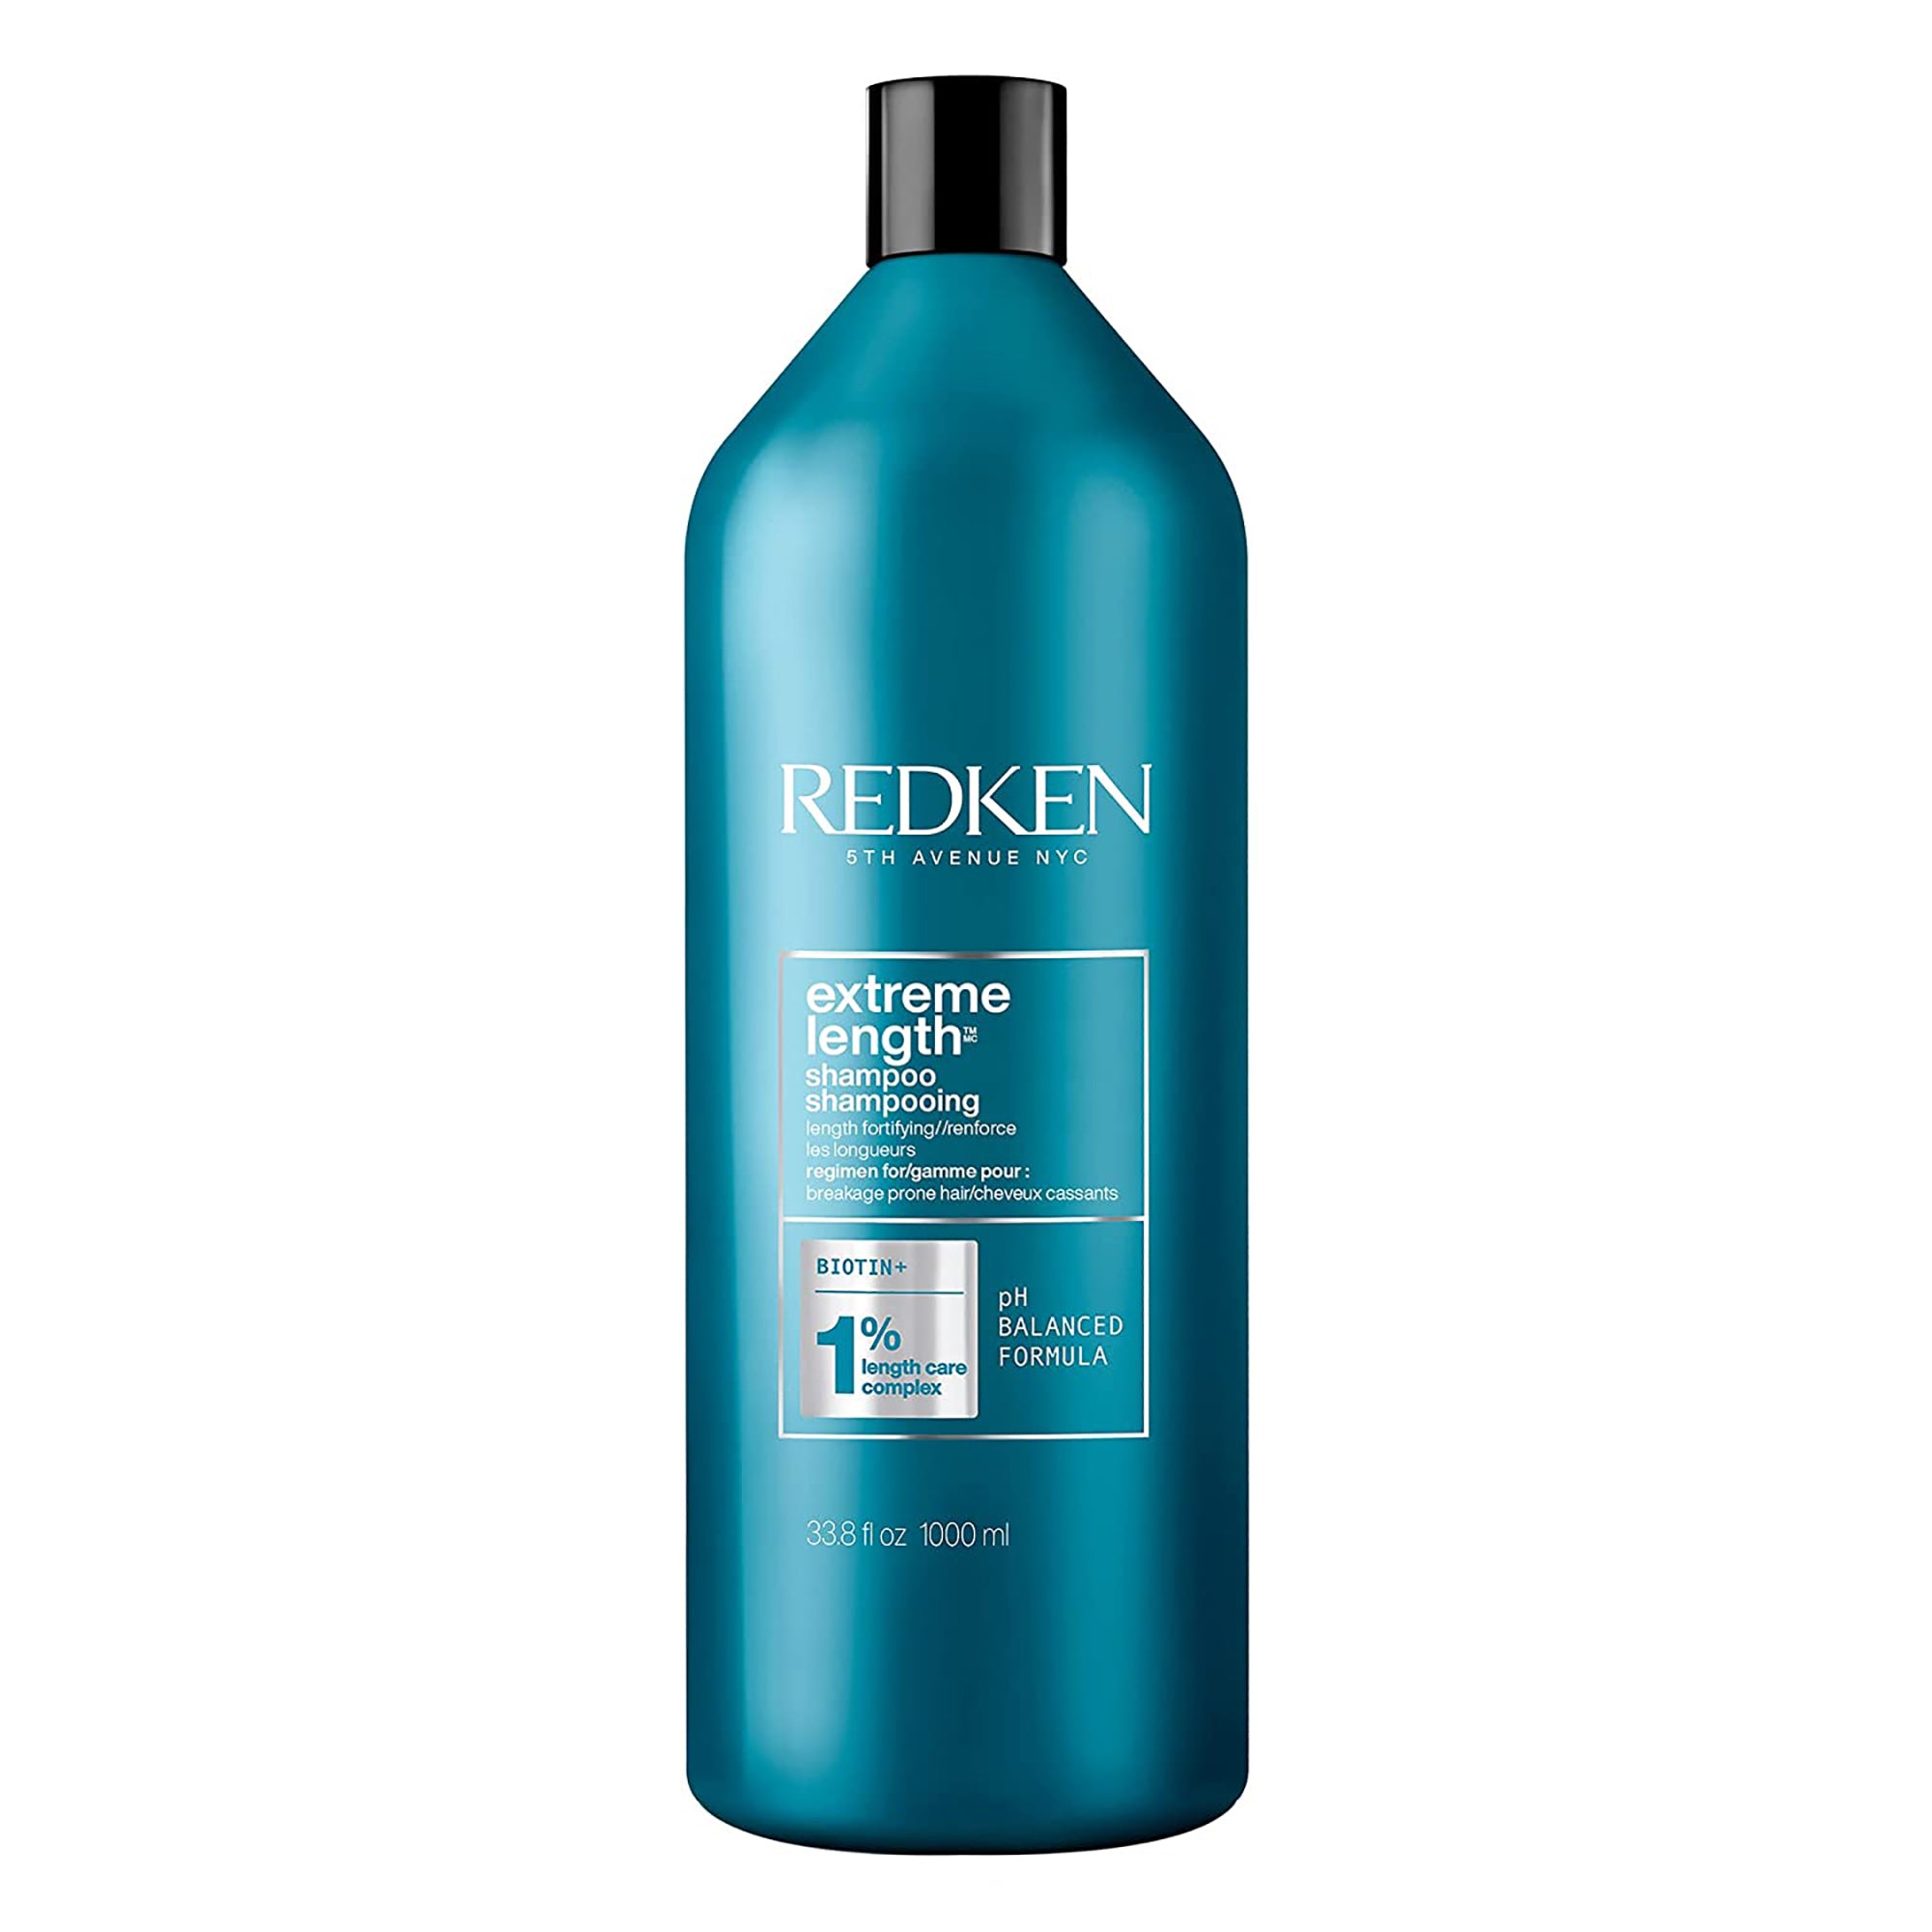 Redken Extreme Length with Biotin Shampoo & Conditioner Duo (Value $104) / DUO